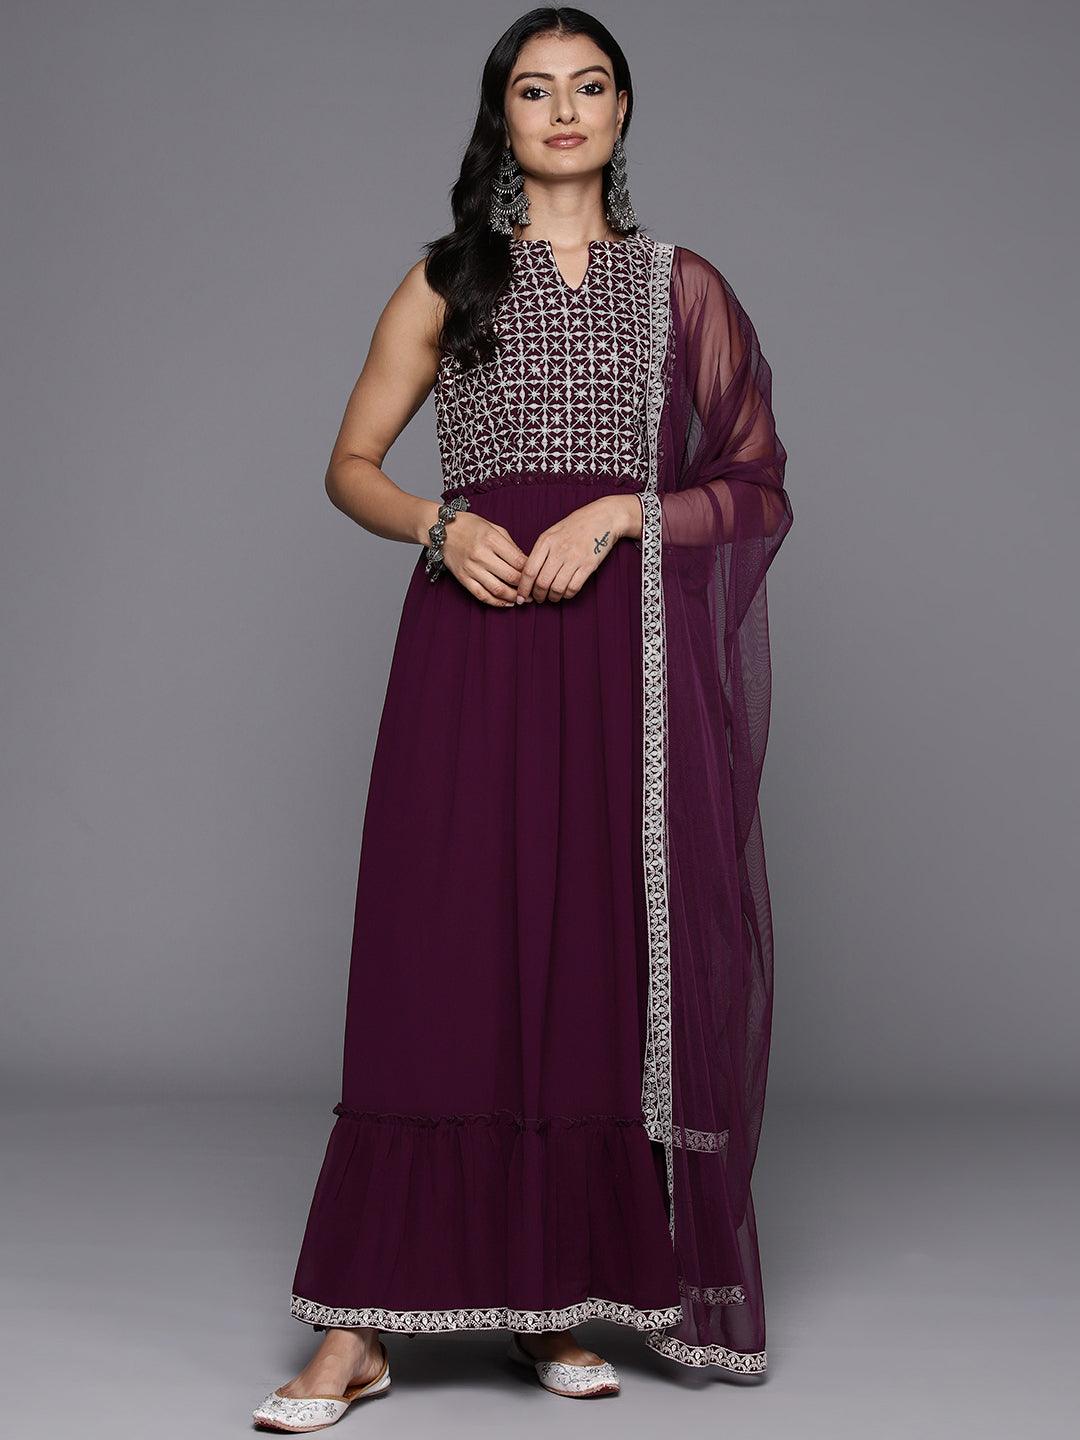 Wine Embroidered Georgette Anarkali Suit With Dupatta